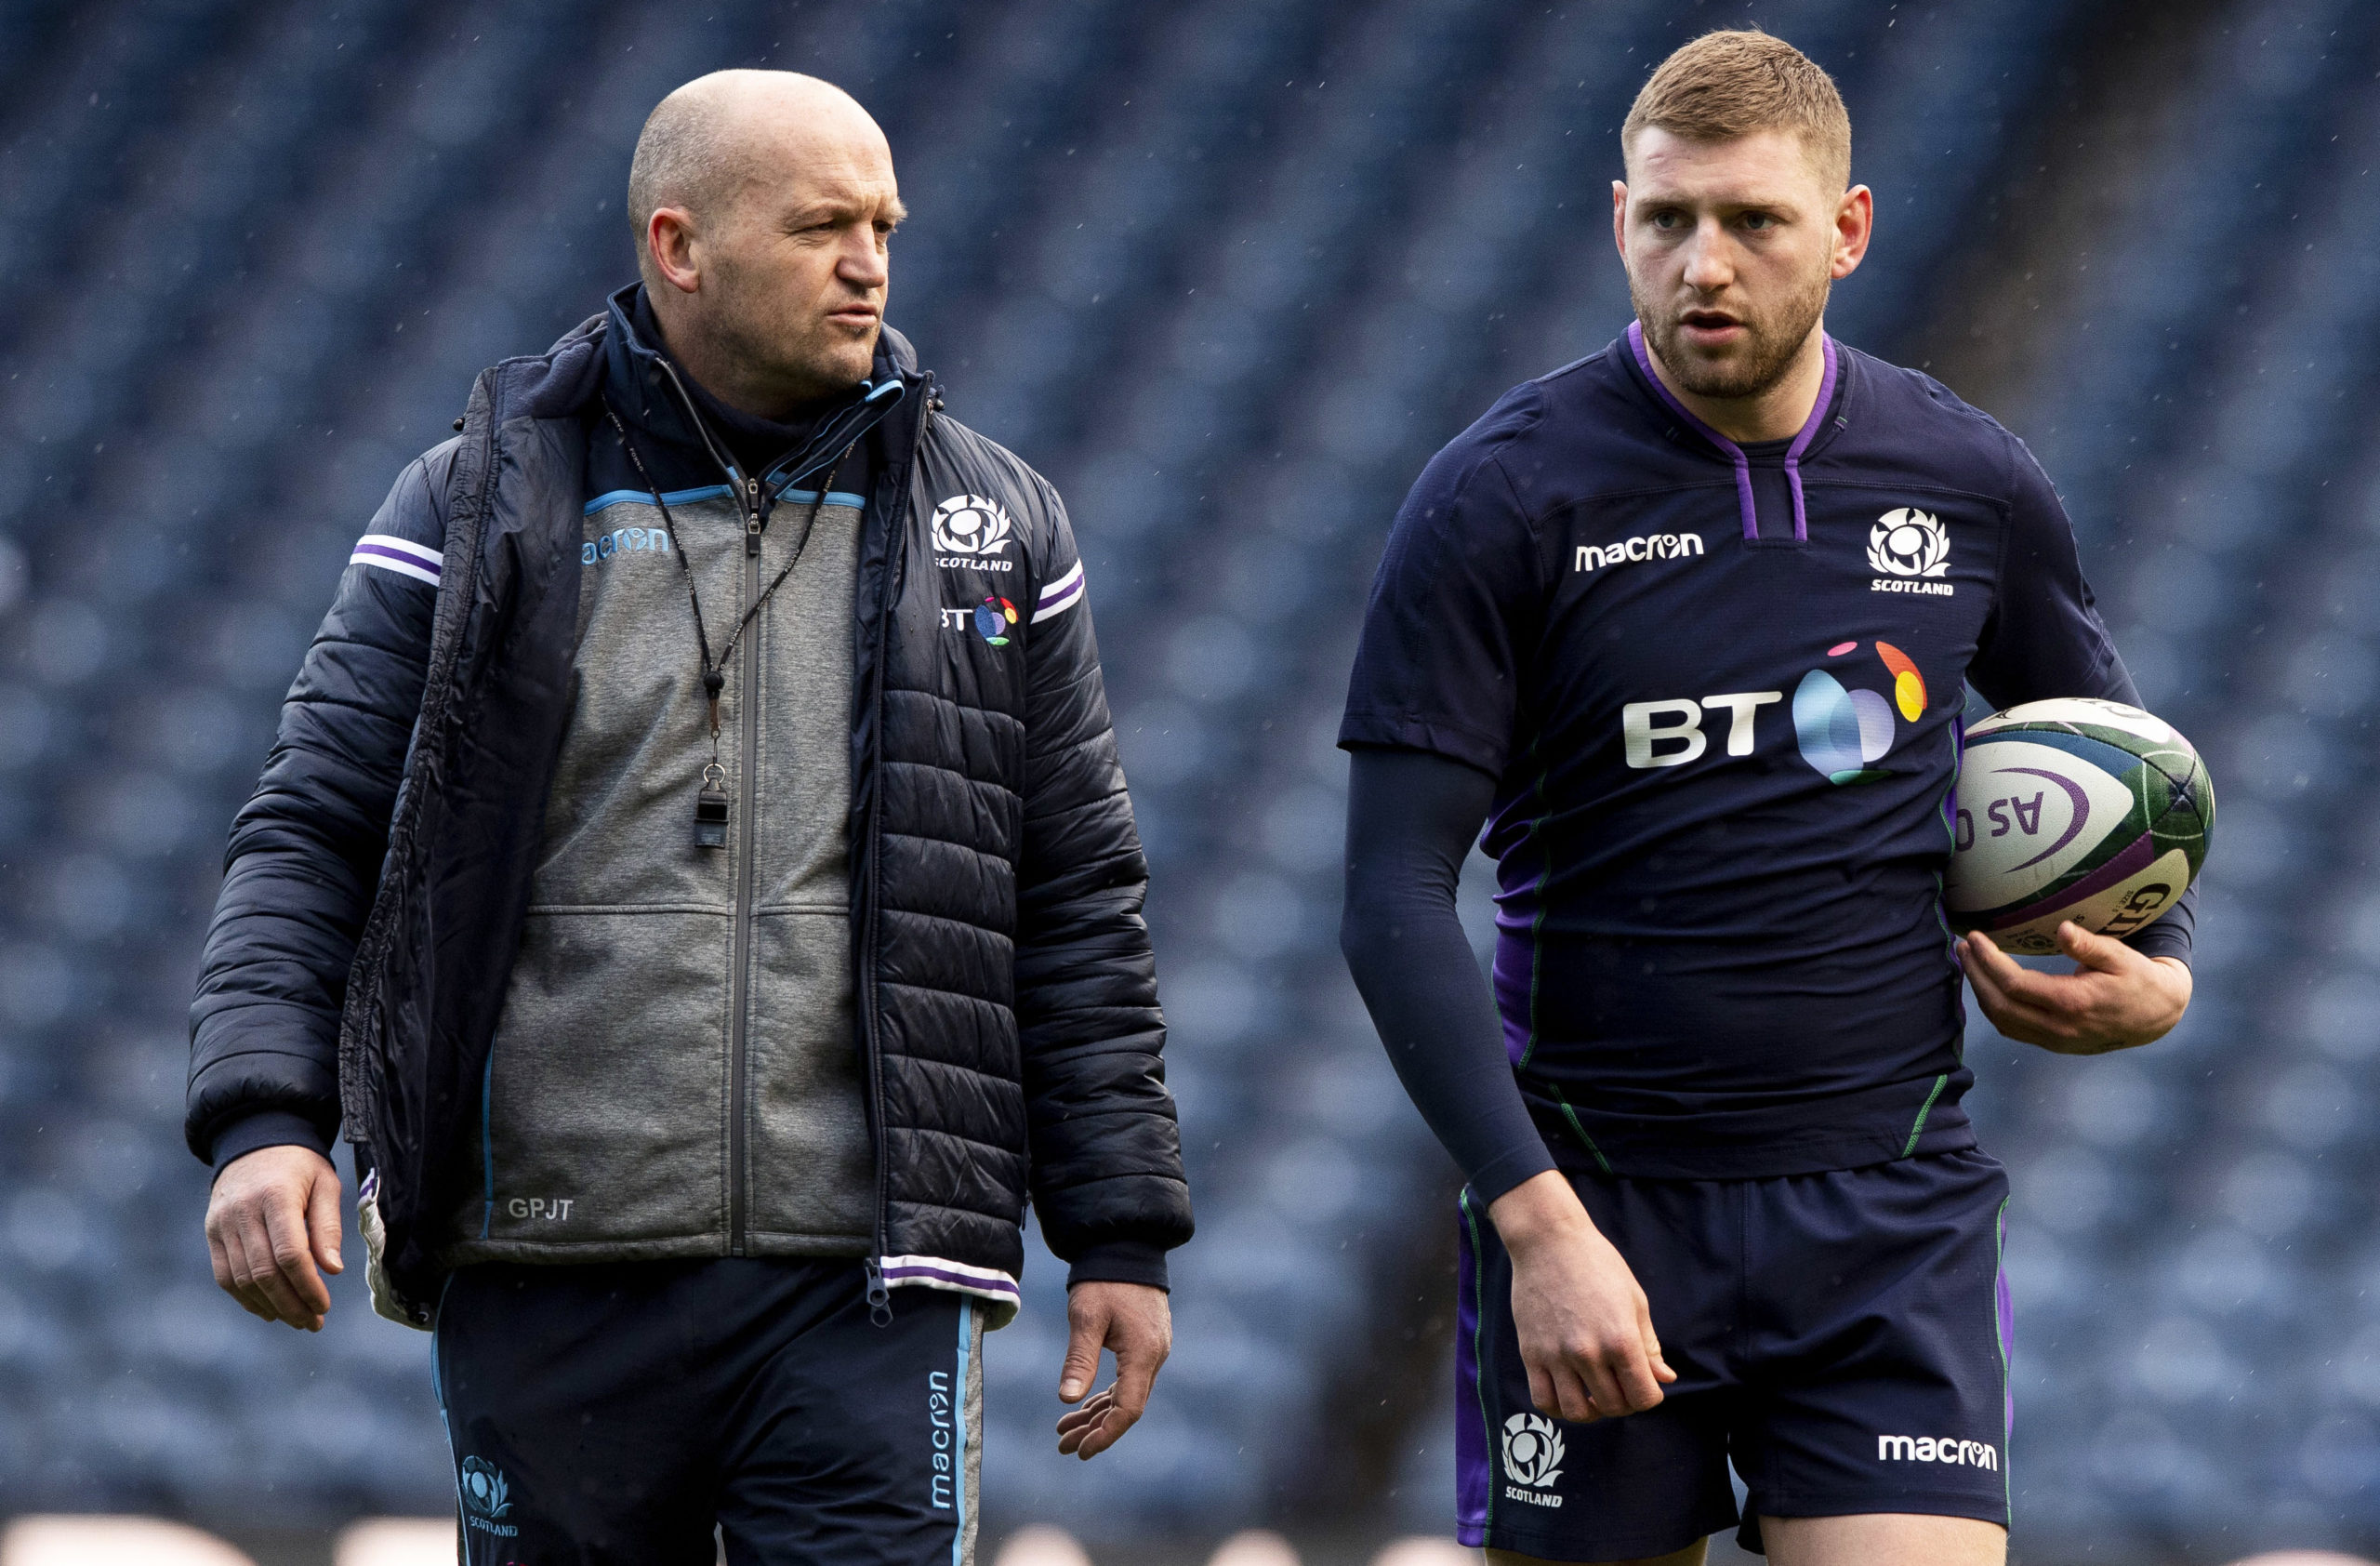 'Highs and lows':Gregor Townsend and Finn Russell